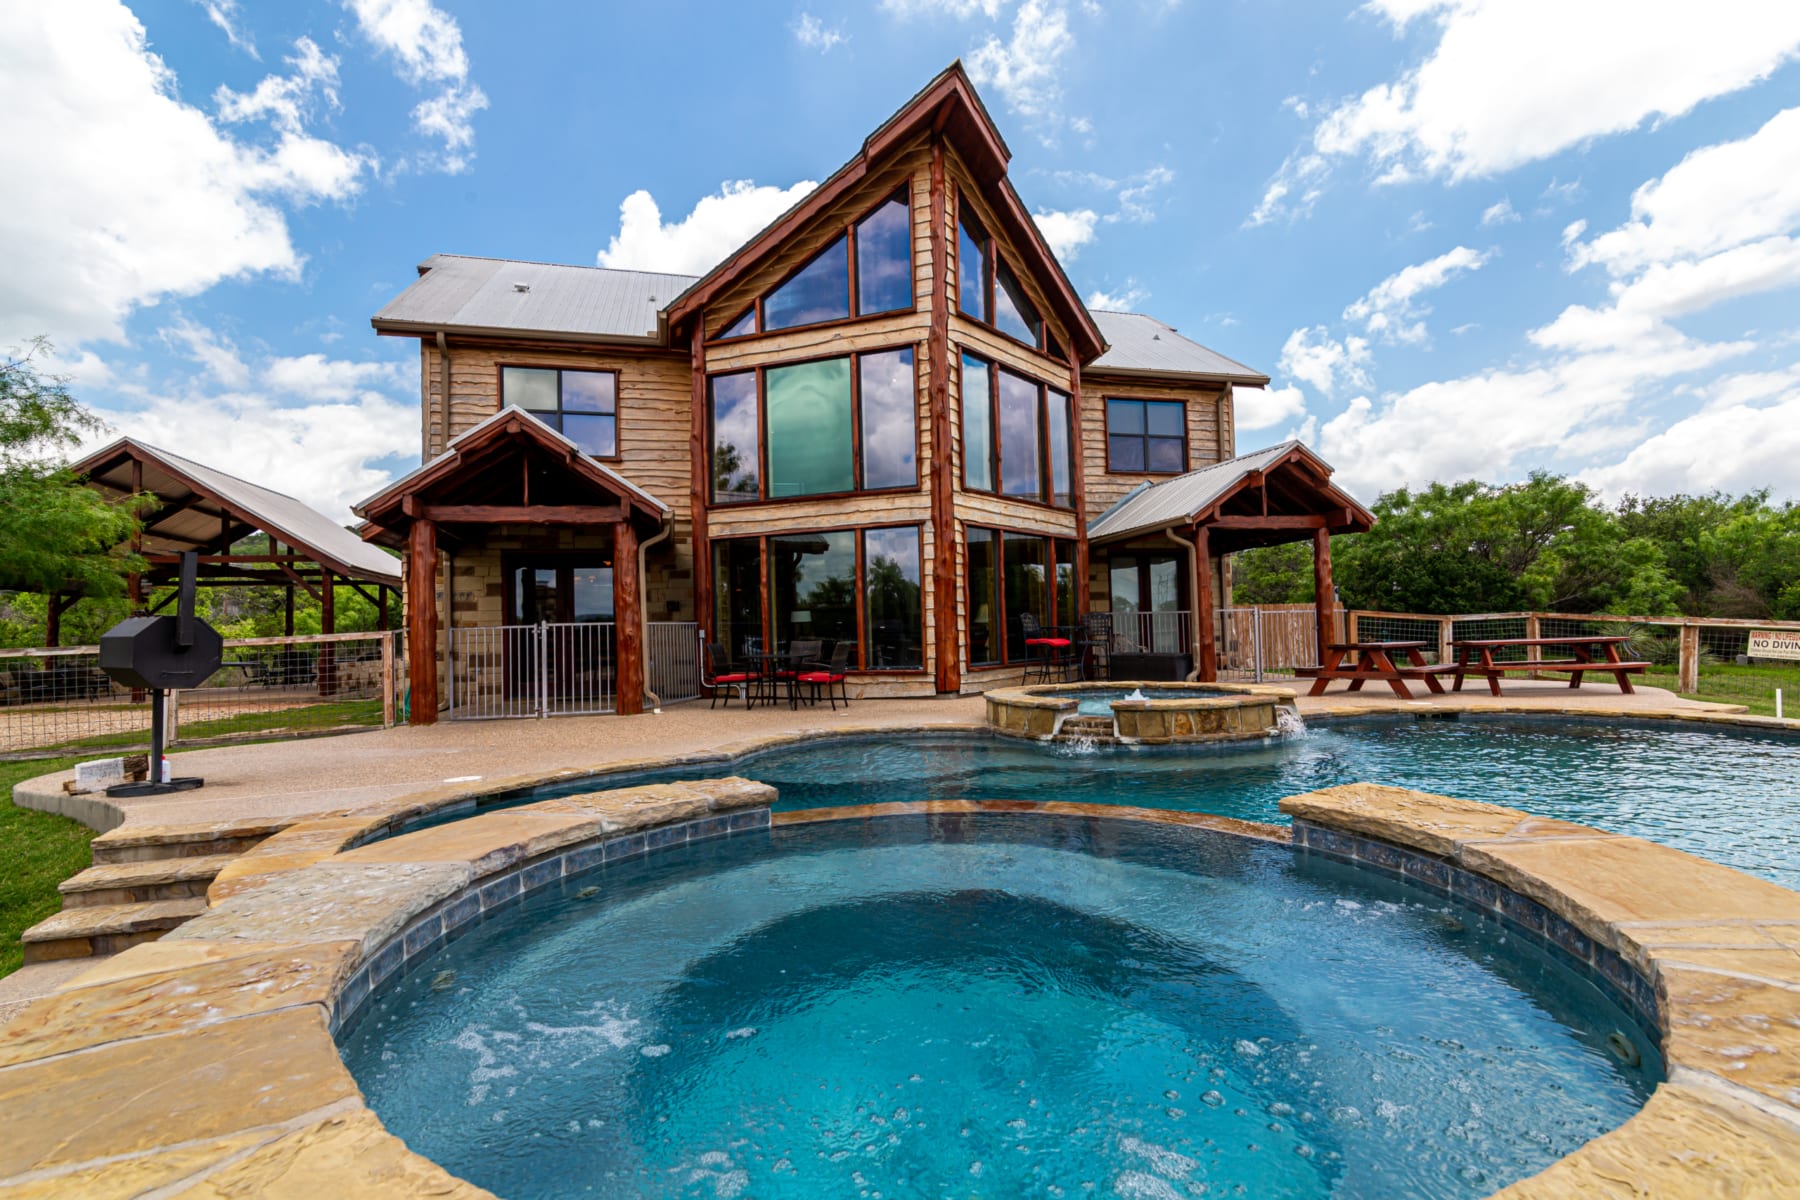 Leanin’ K home exterior, outdoor pool and hot tub